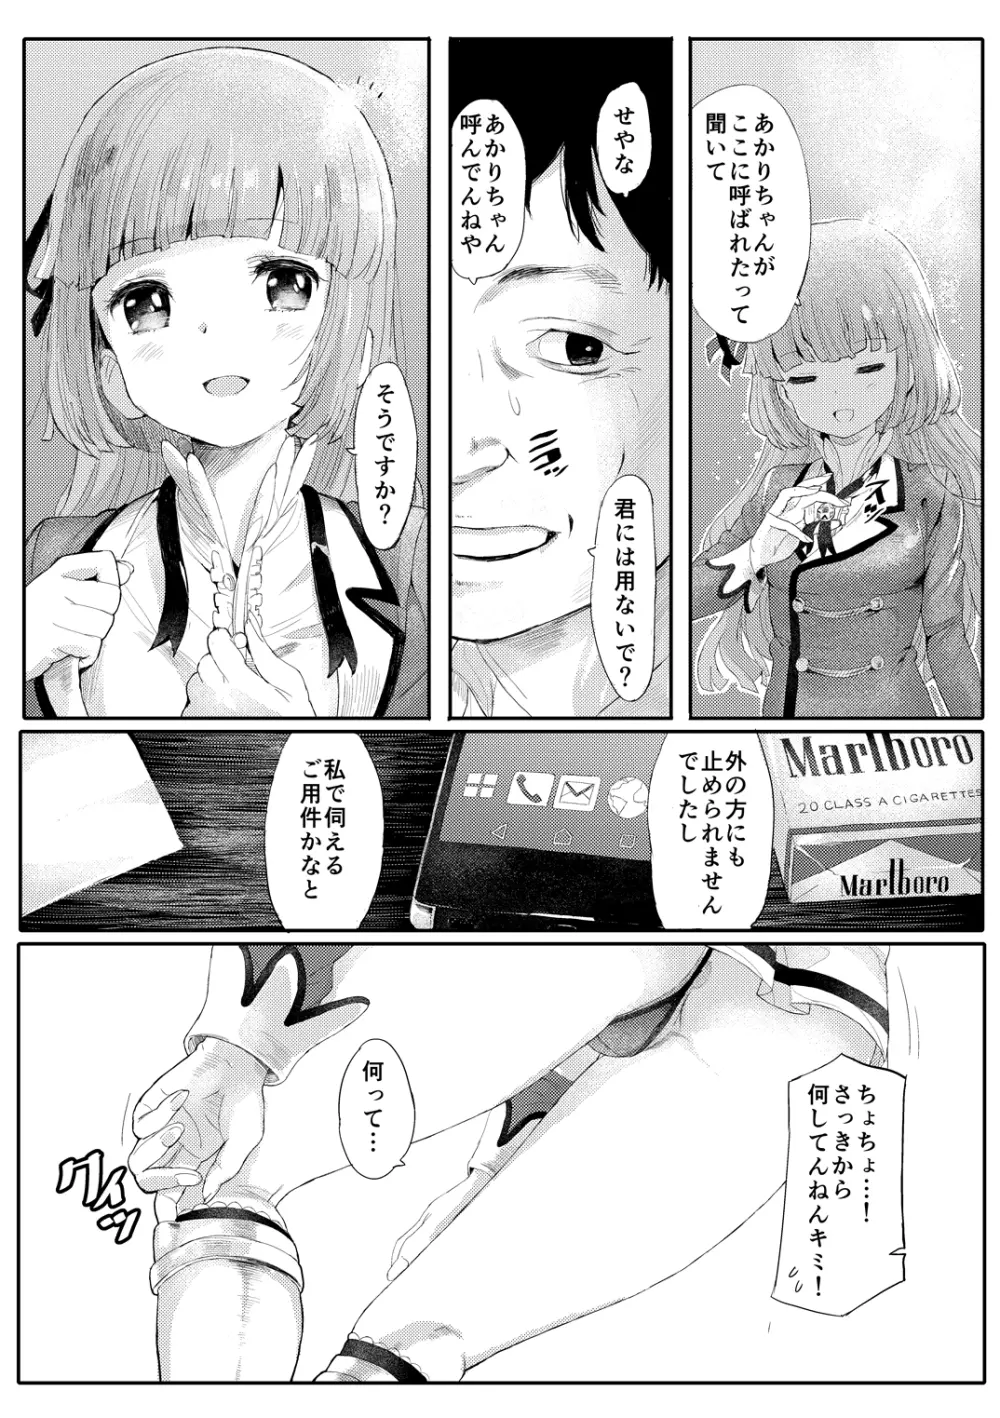 MG+OO SP Page.3